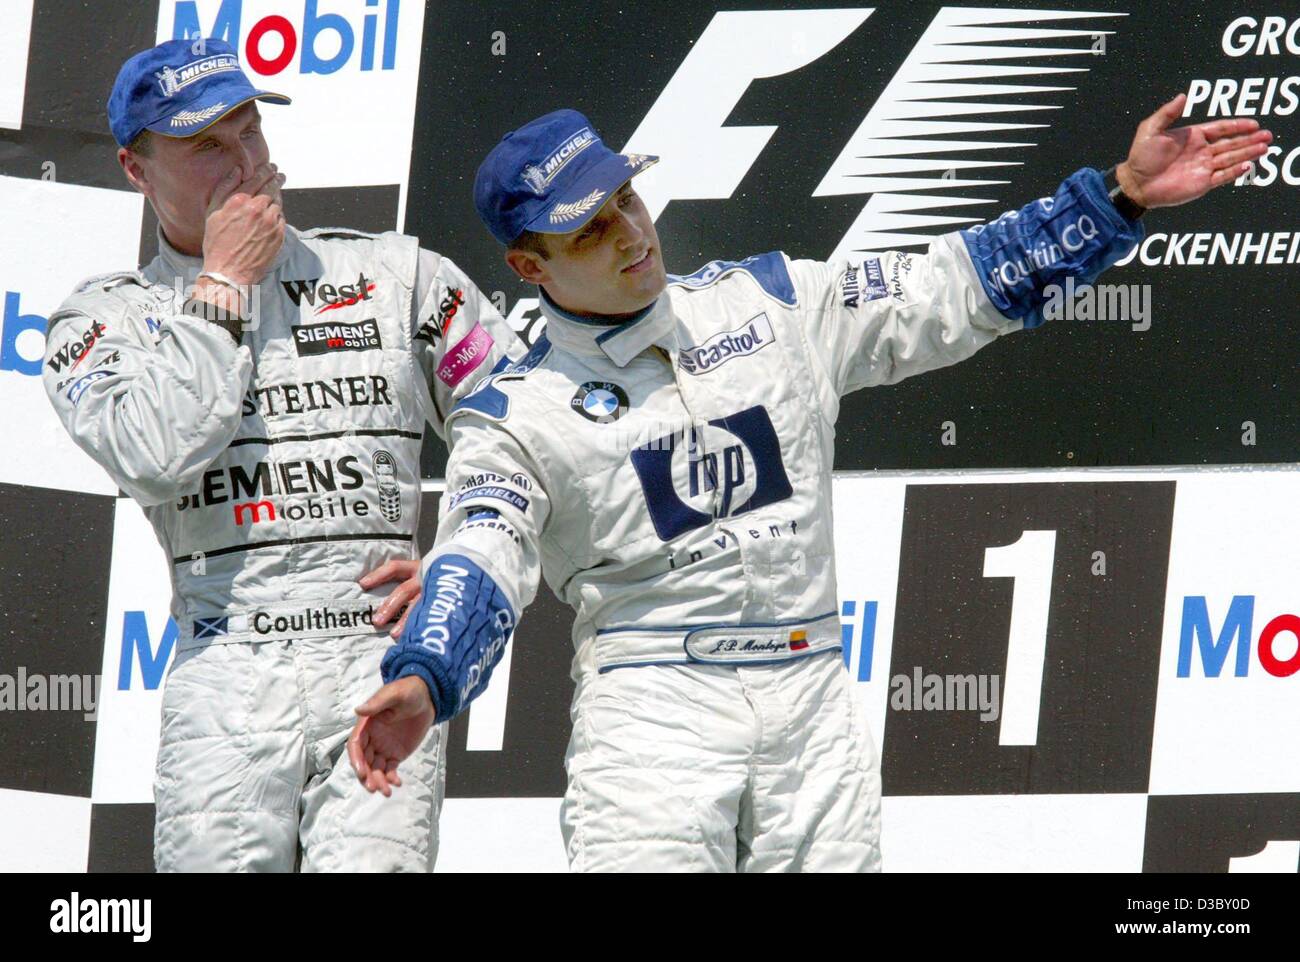 dpa) - Colombian Juan Pablo Montoya of BMW-Williams (R) celebrates on the  podium with second-placed David Coulthard of McLaren-Mercedes (L) after  winning the Formula One Grand Prix of Germany at the Hockenheim